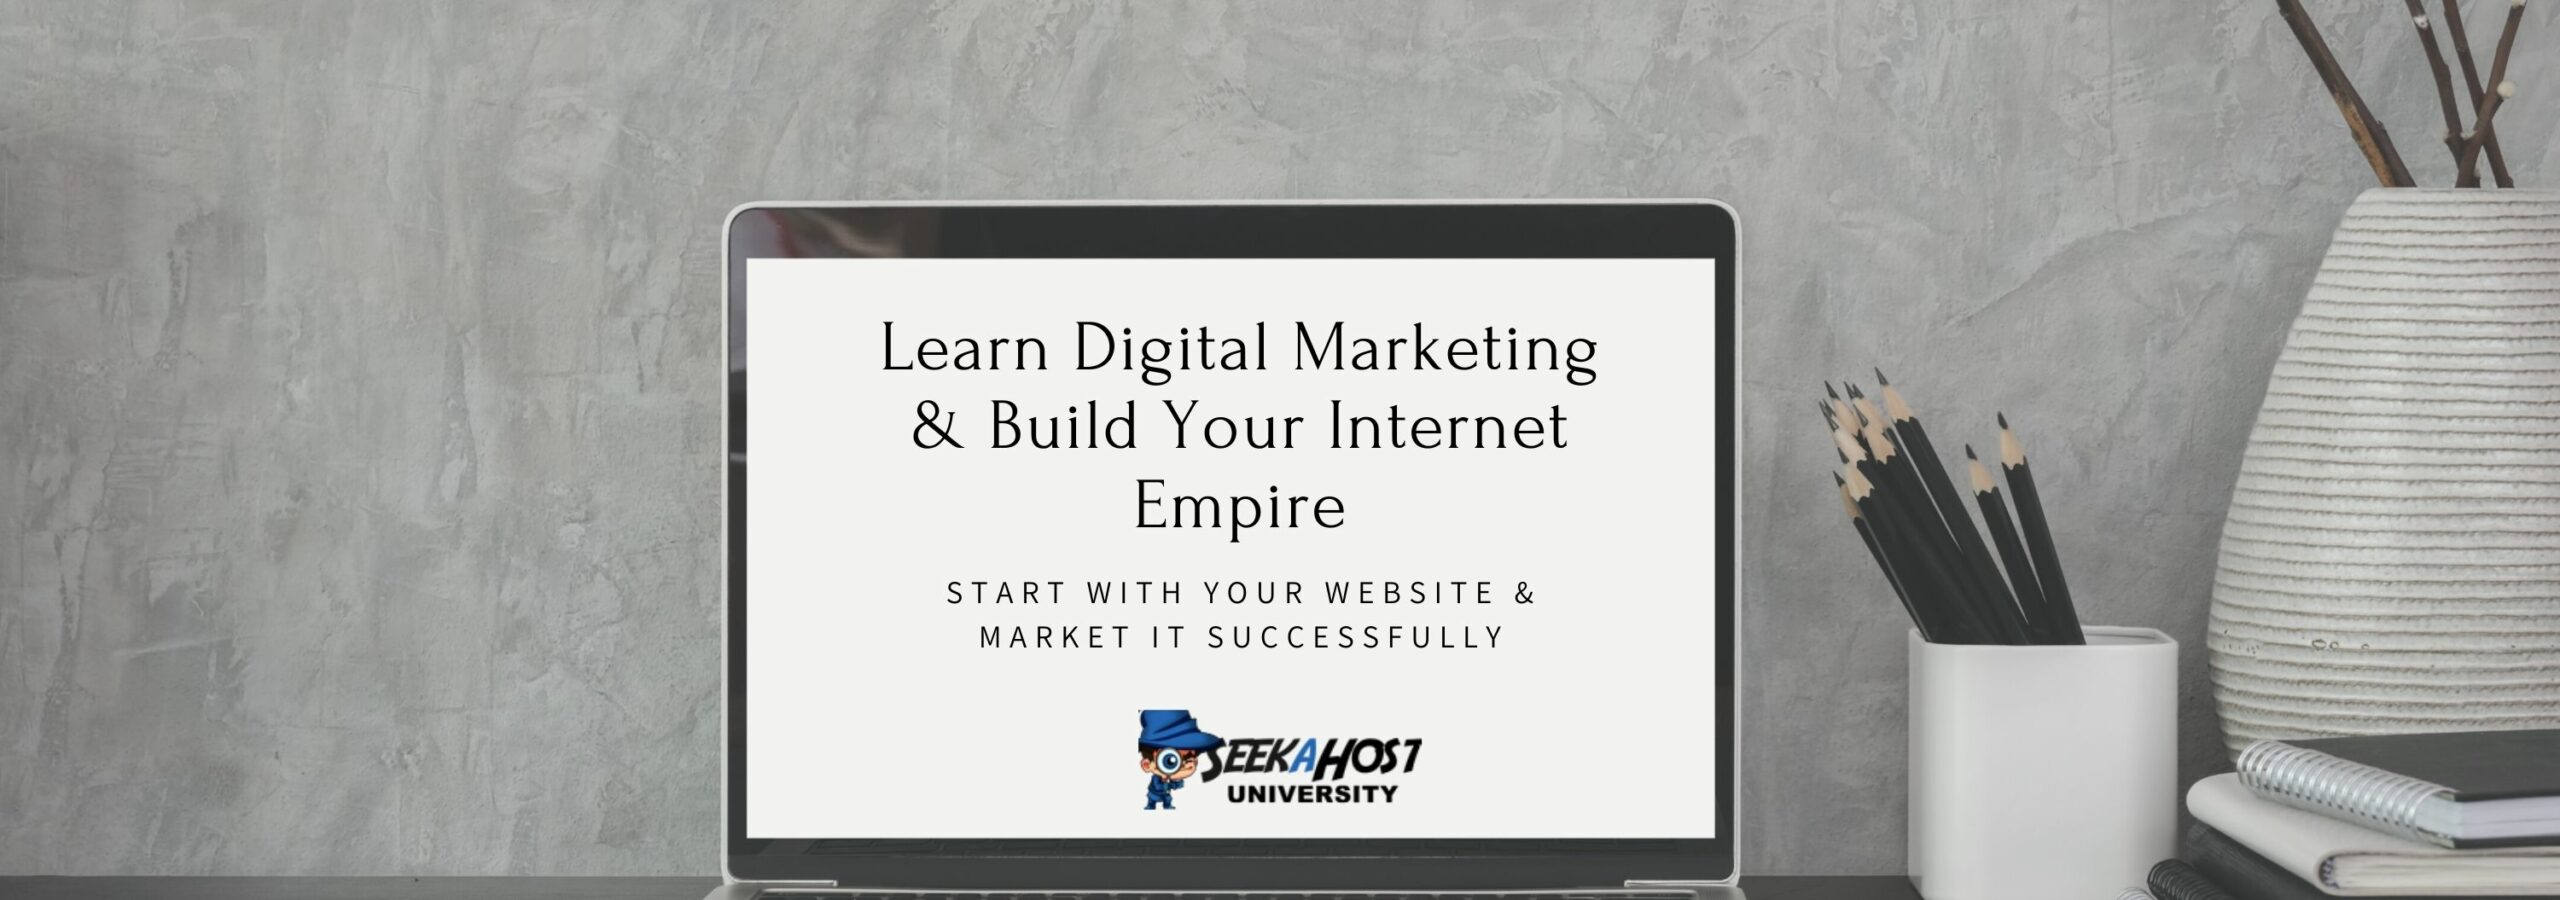 best-online-marketing-courses-to-build-an-internet business